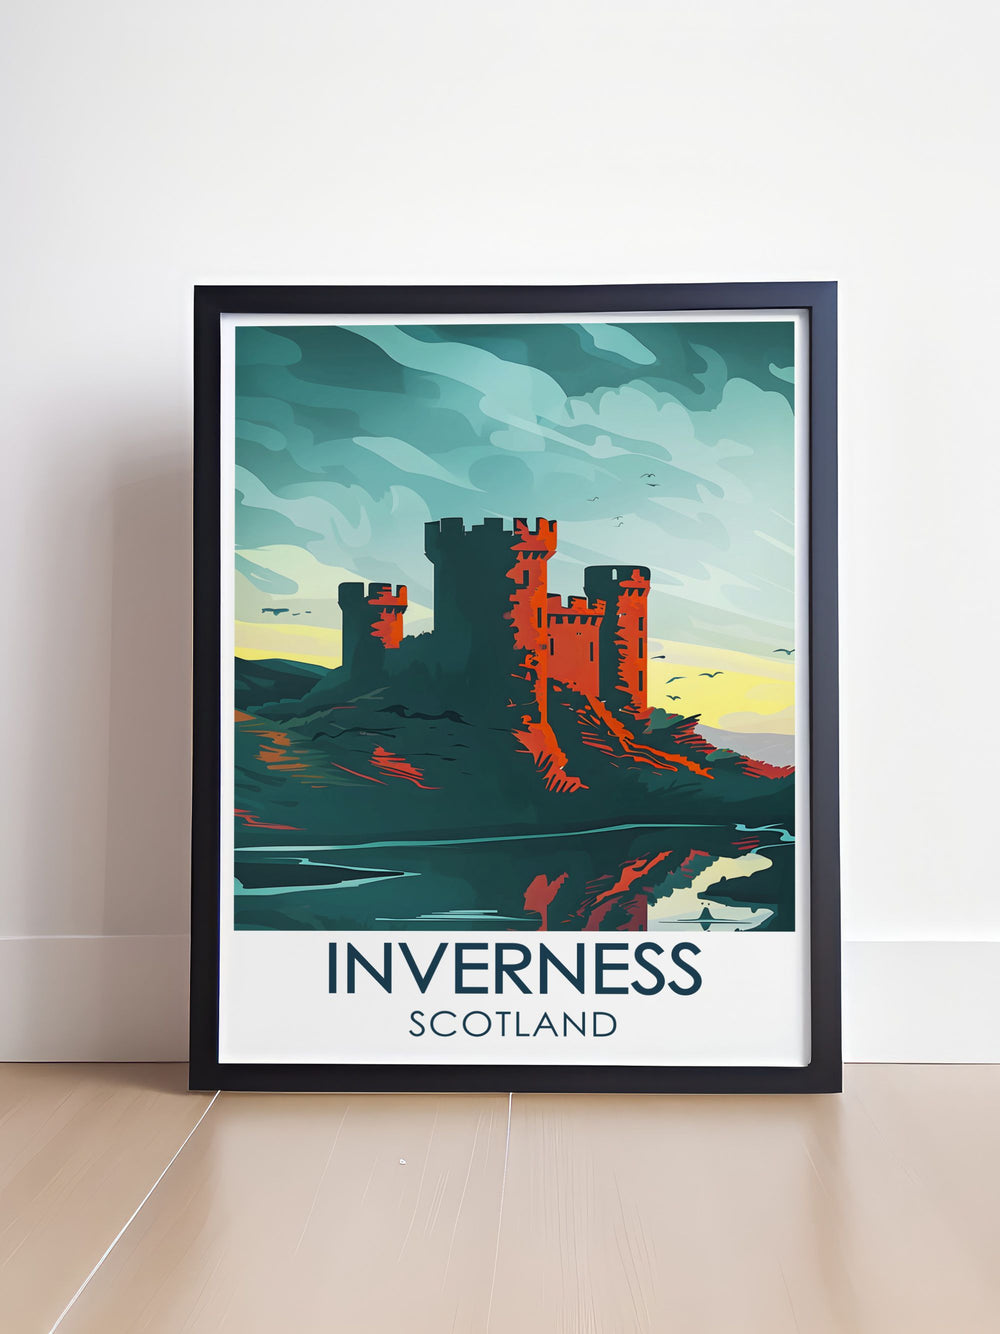 Fine art print featuring the Great Glen Way, illustrating the picturesque trails that wind through the heart of the Scottish Highlands, with expansive views of lochs, forests, and rugged mountains in the distance.